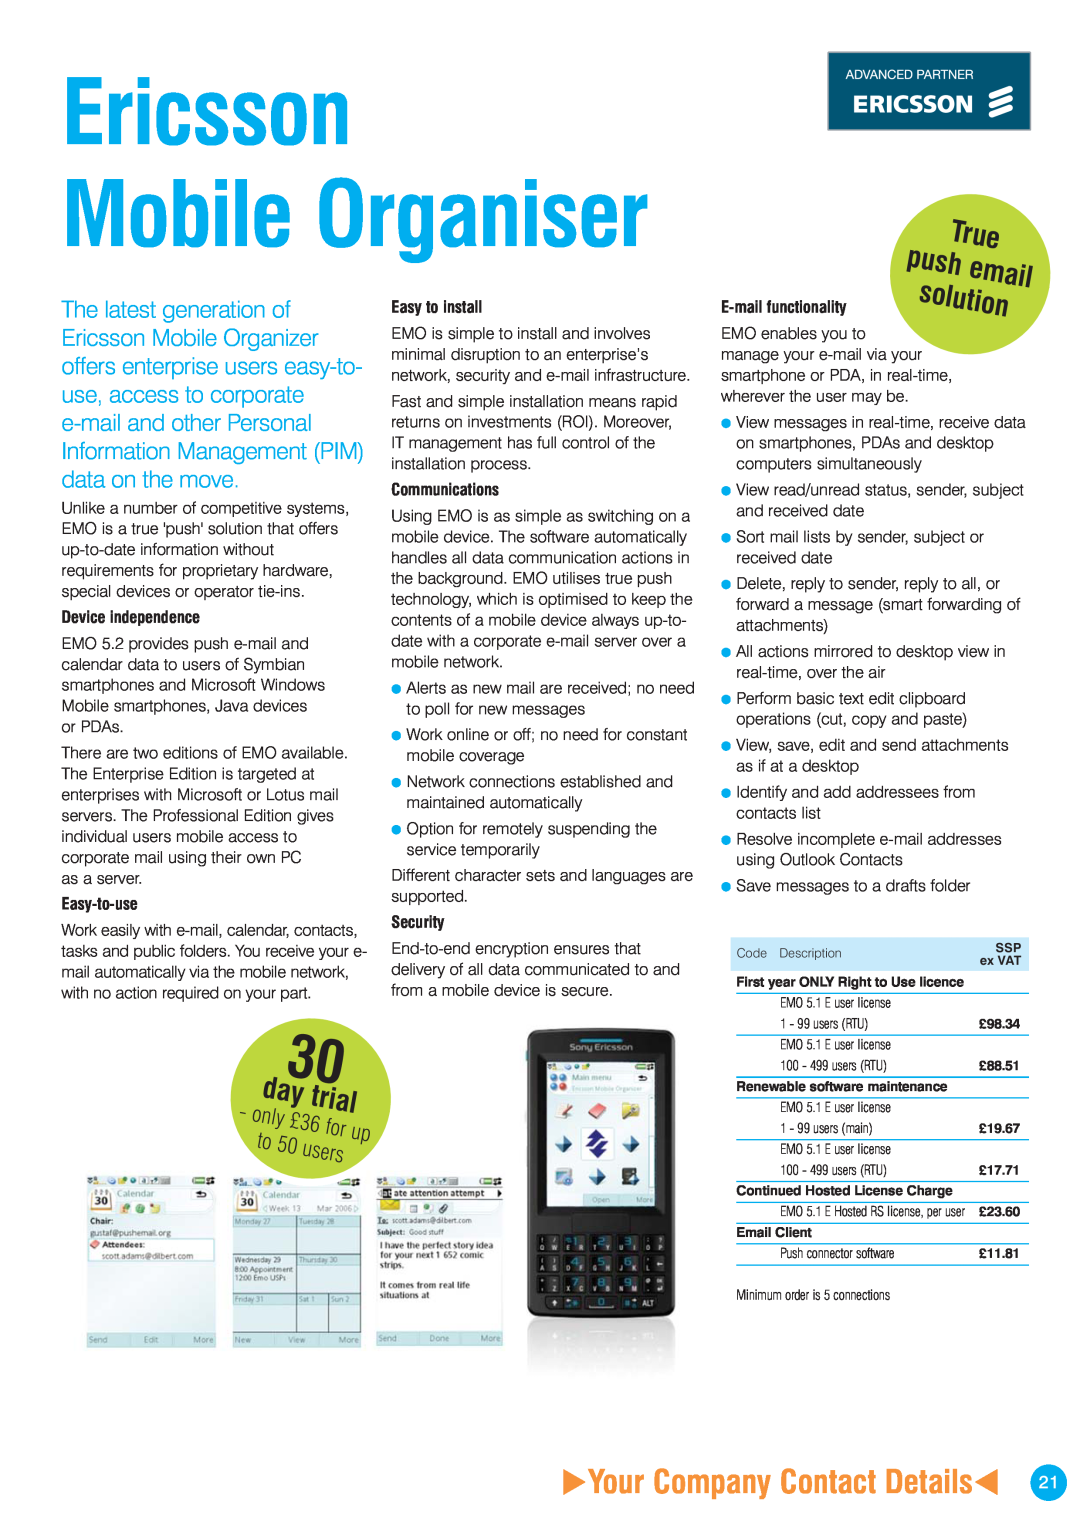 Ericsson ISDN2 Ericsson Mobile Organiser, True, trial, solution, Your Company Contact Details, push email, only, for up 